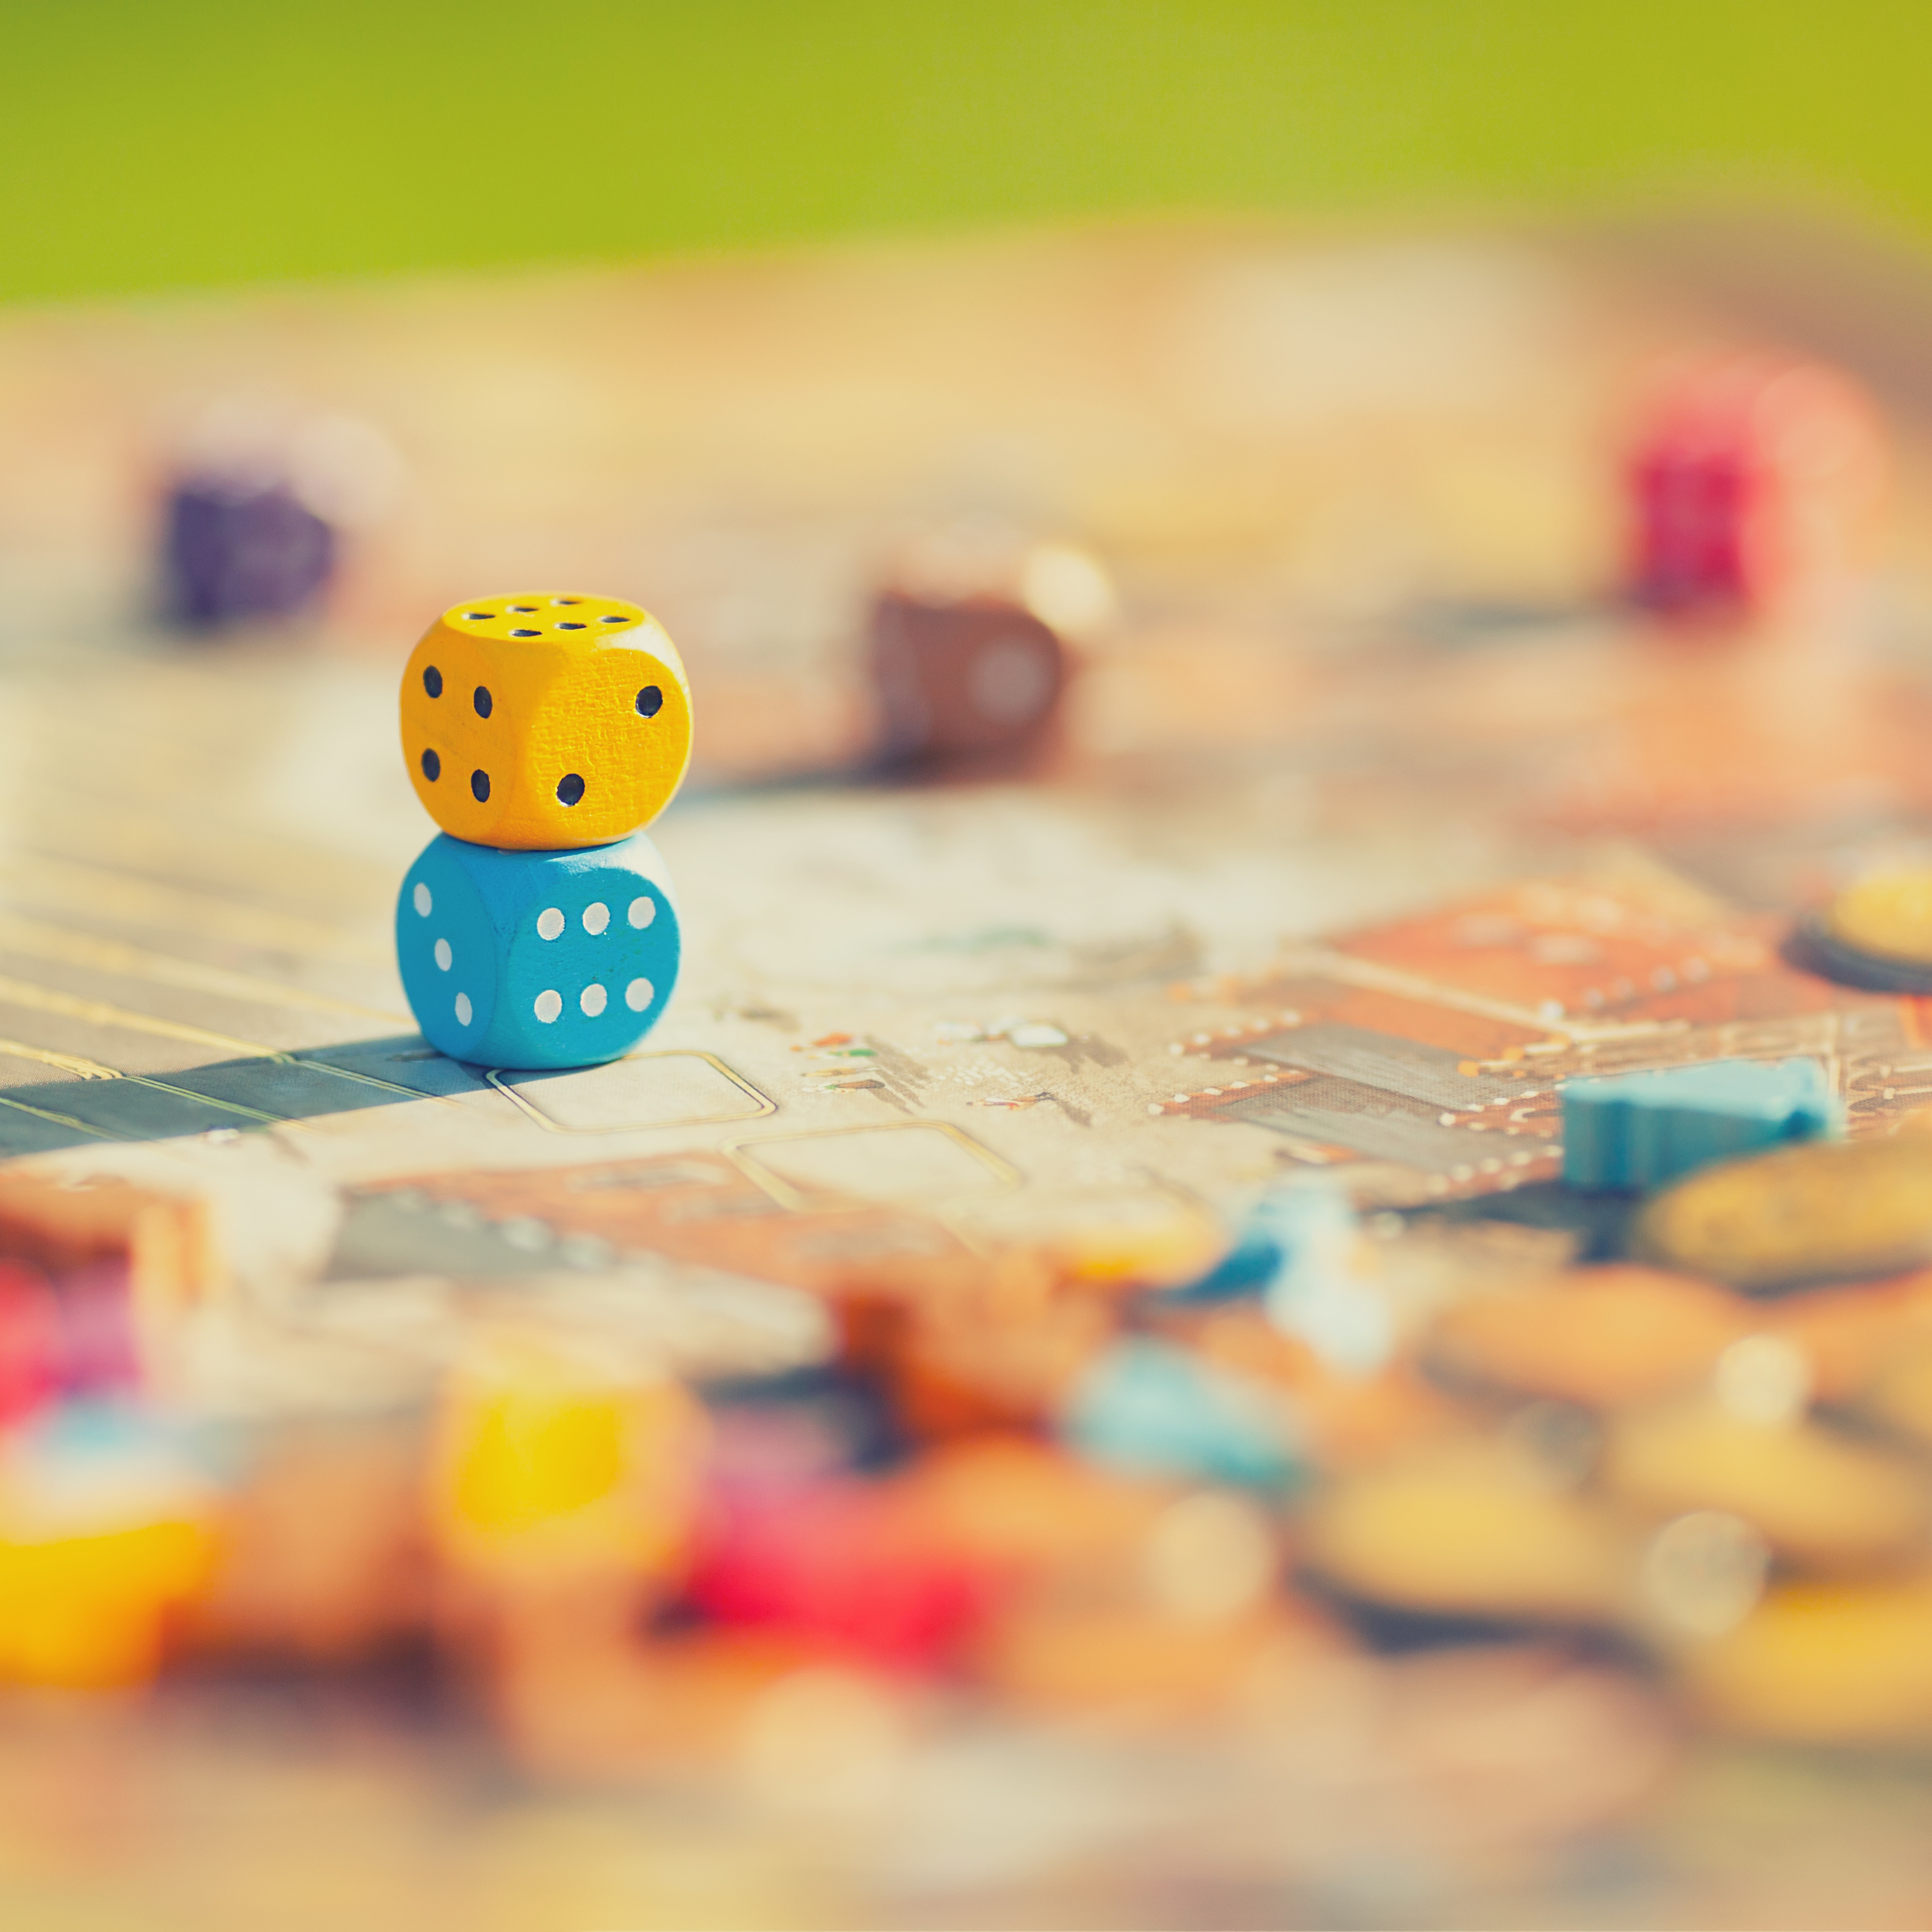 Games default image: photo of a board game with multicolored dice and pieces. The edges of the photo are aesthetic and blurry.